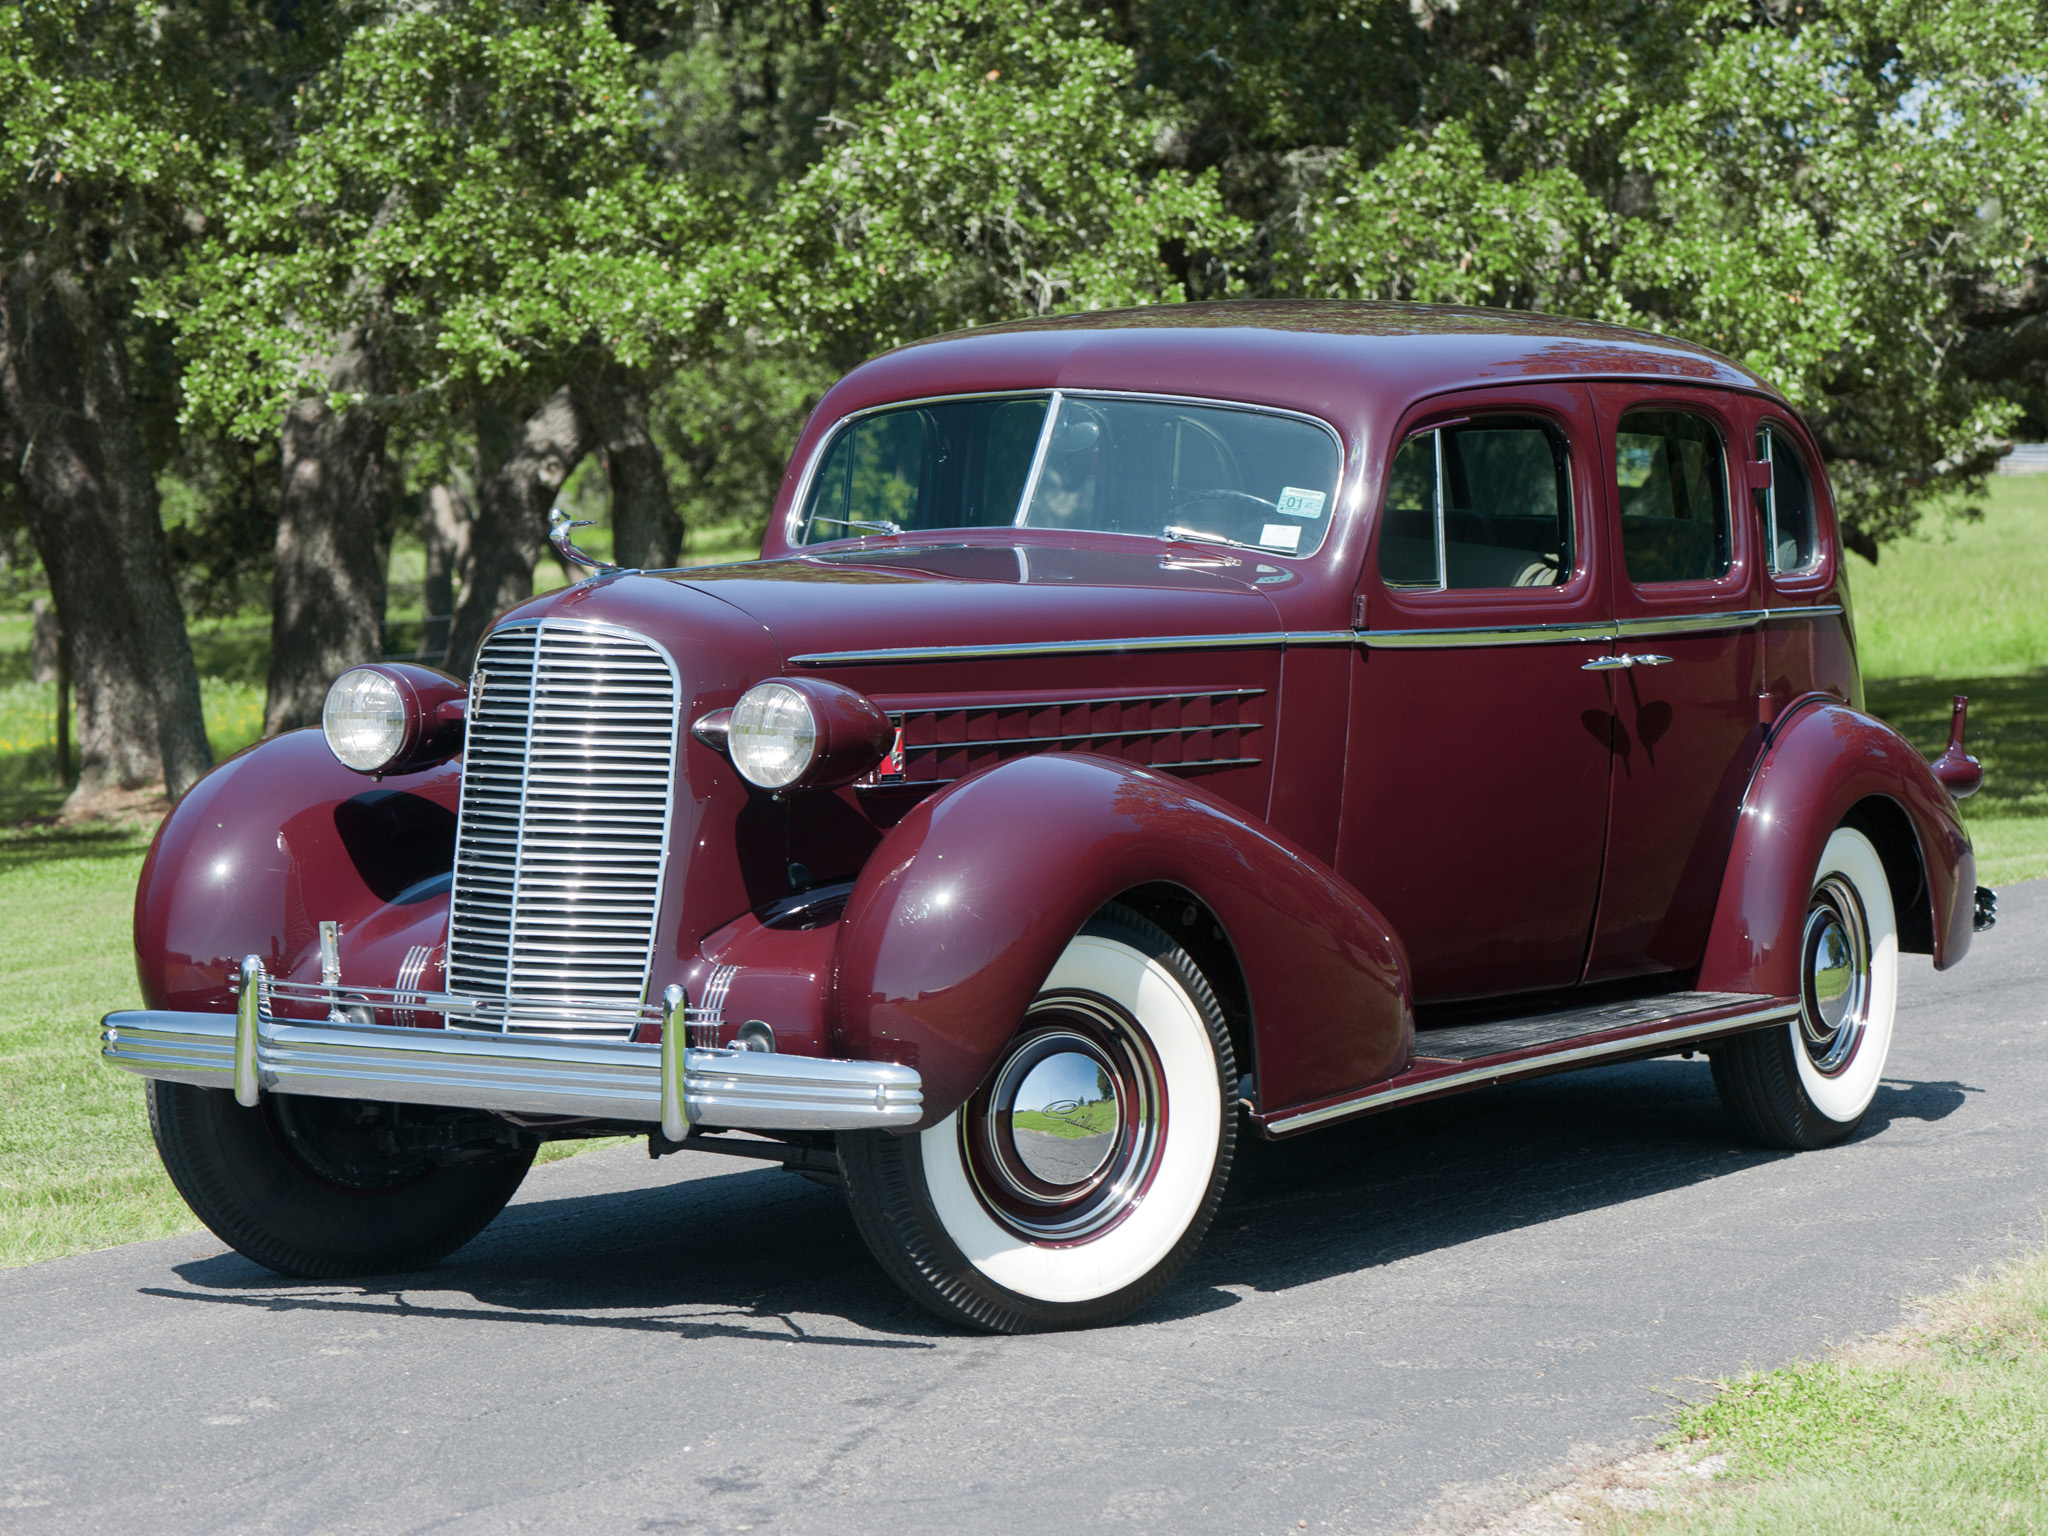 1936 Cadillac V8 Series 70 Coupe HD wallpapers, Desktop wallpaper - most viewed